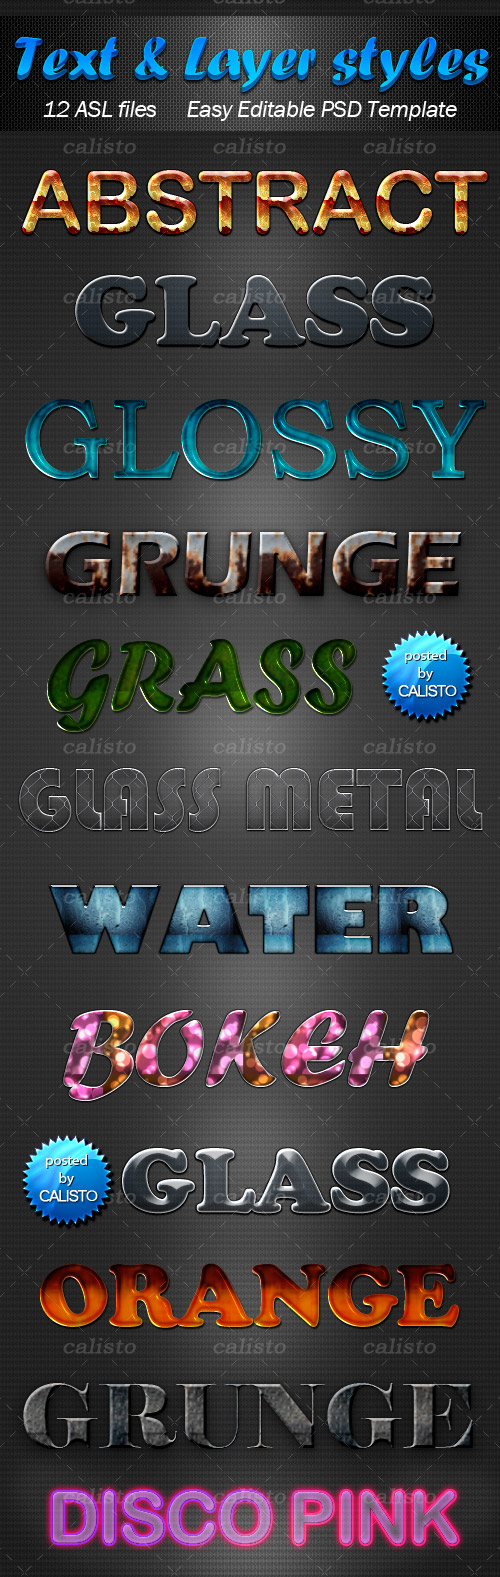 Photoshop Text & Layer Styles